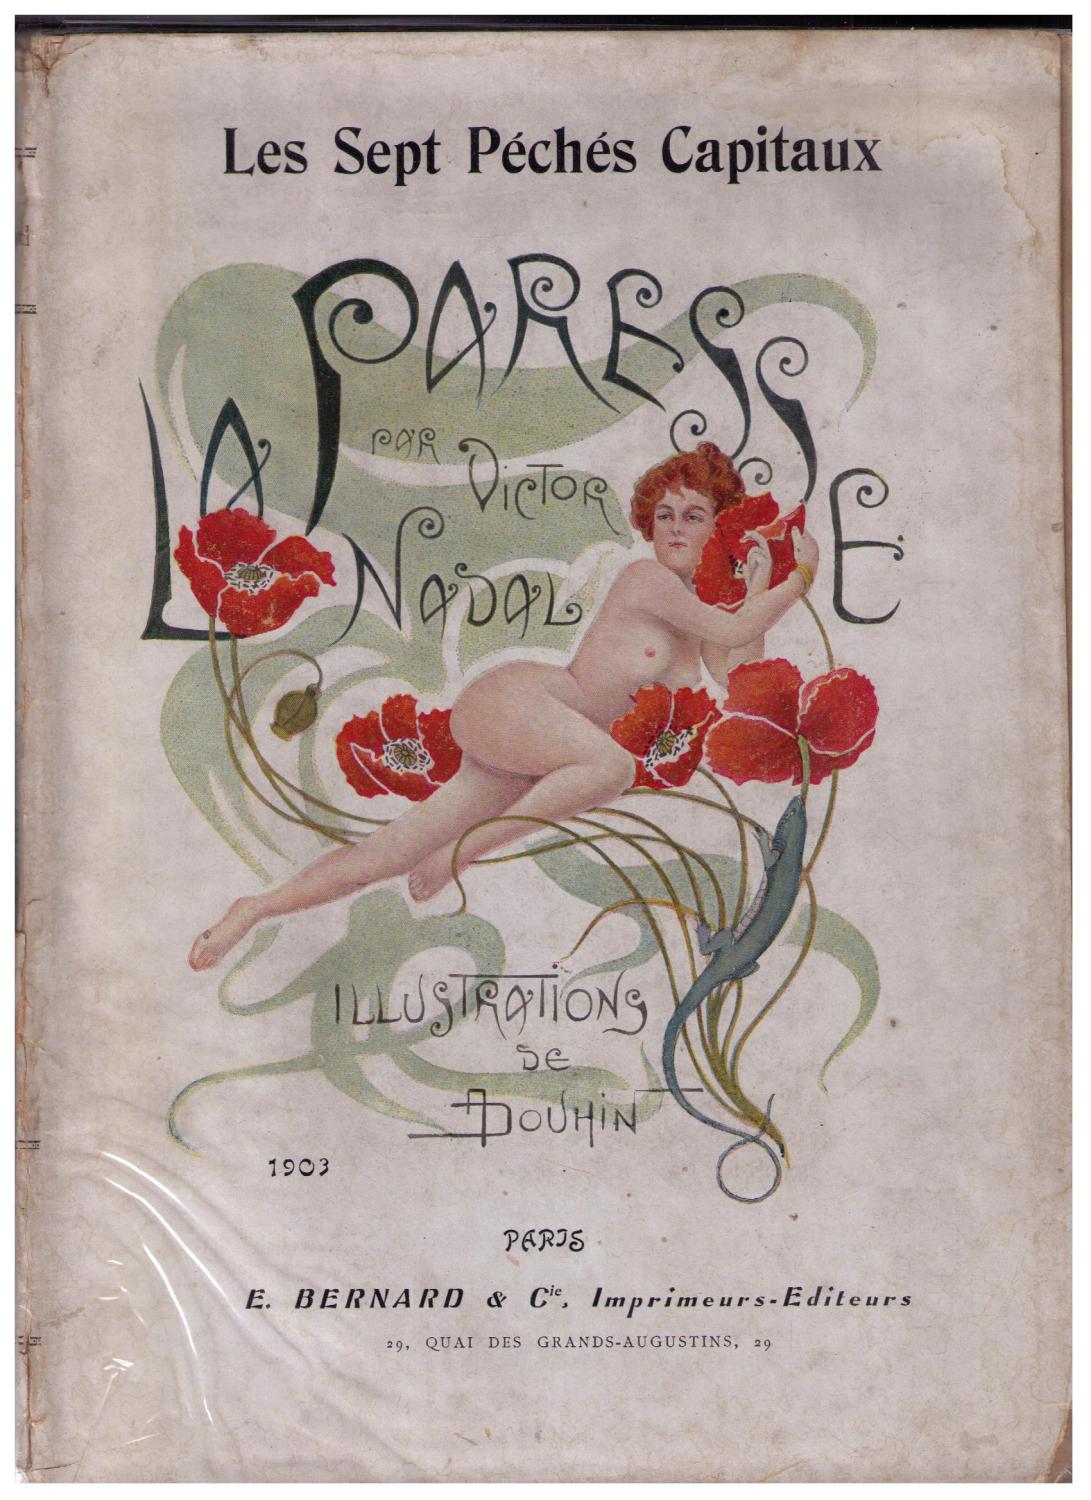 André Douhin's cover illustration for 'La Paresse' by Victor Nadal. Published by E. Bernard et Cie., 1903